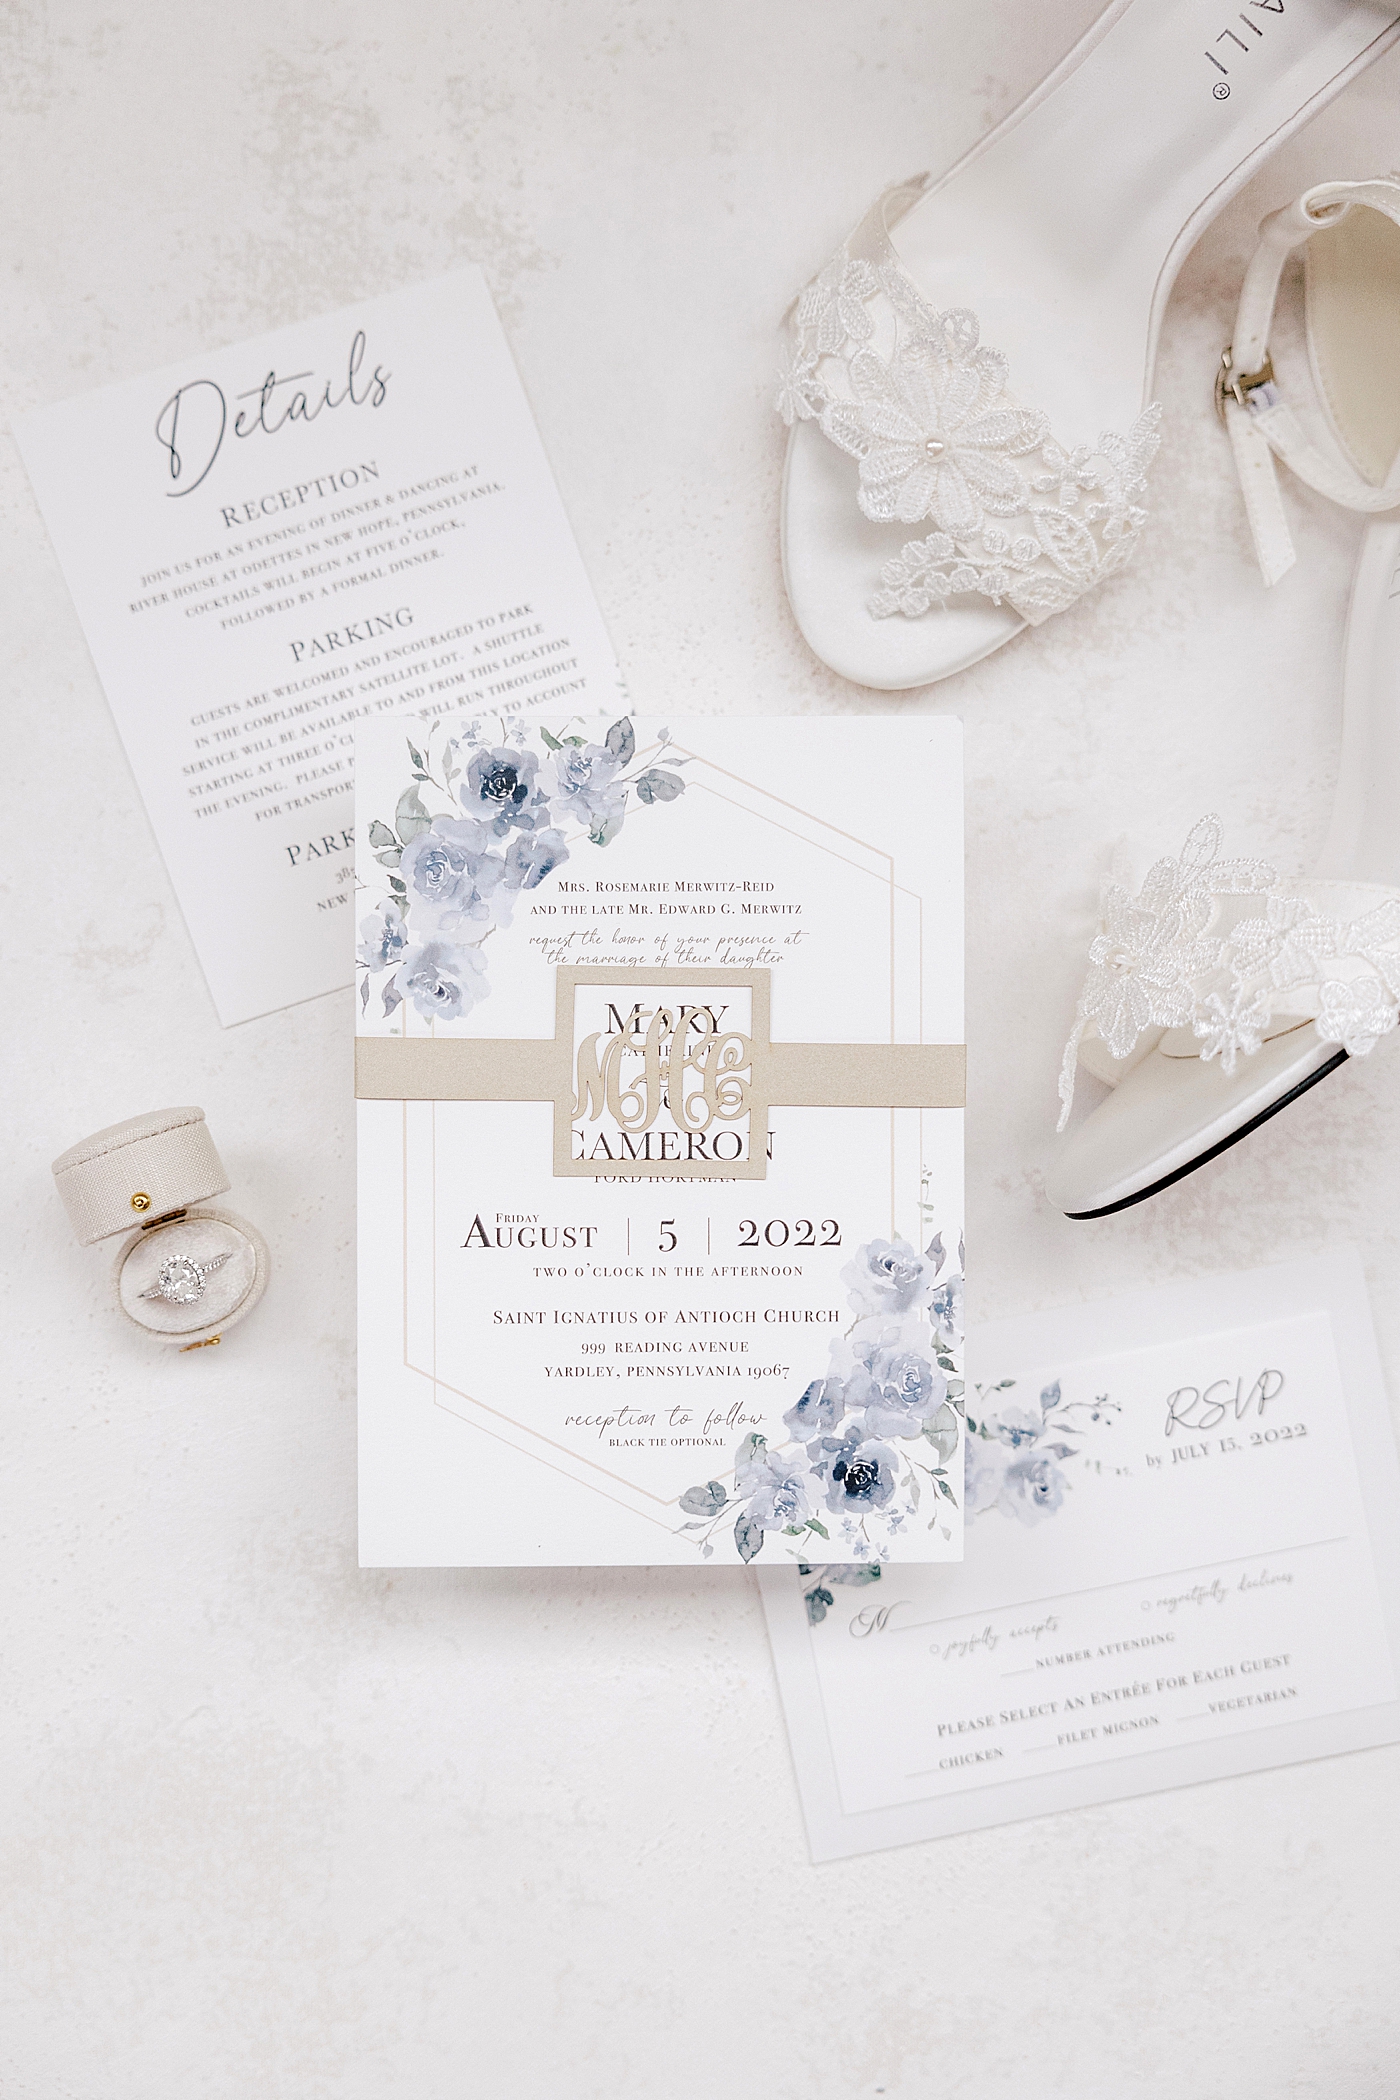 Wedding invitation styled with bridal shoes during River House Odette's Wedding | Image by Hope Helmuth Photography